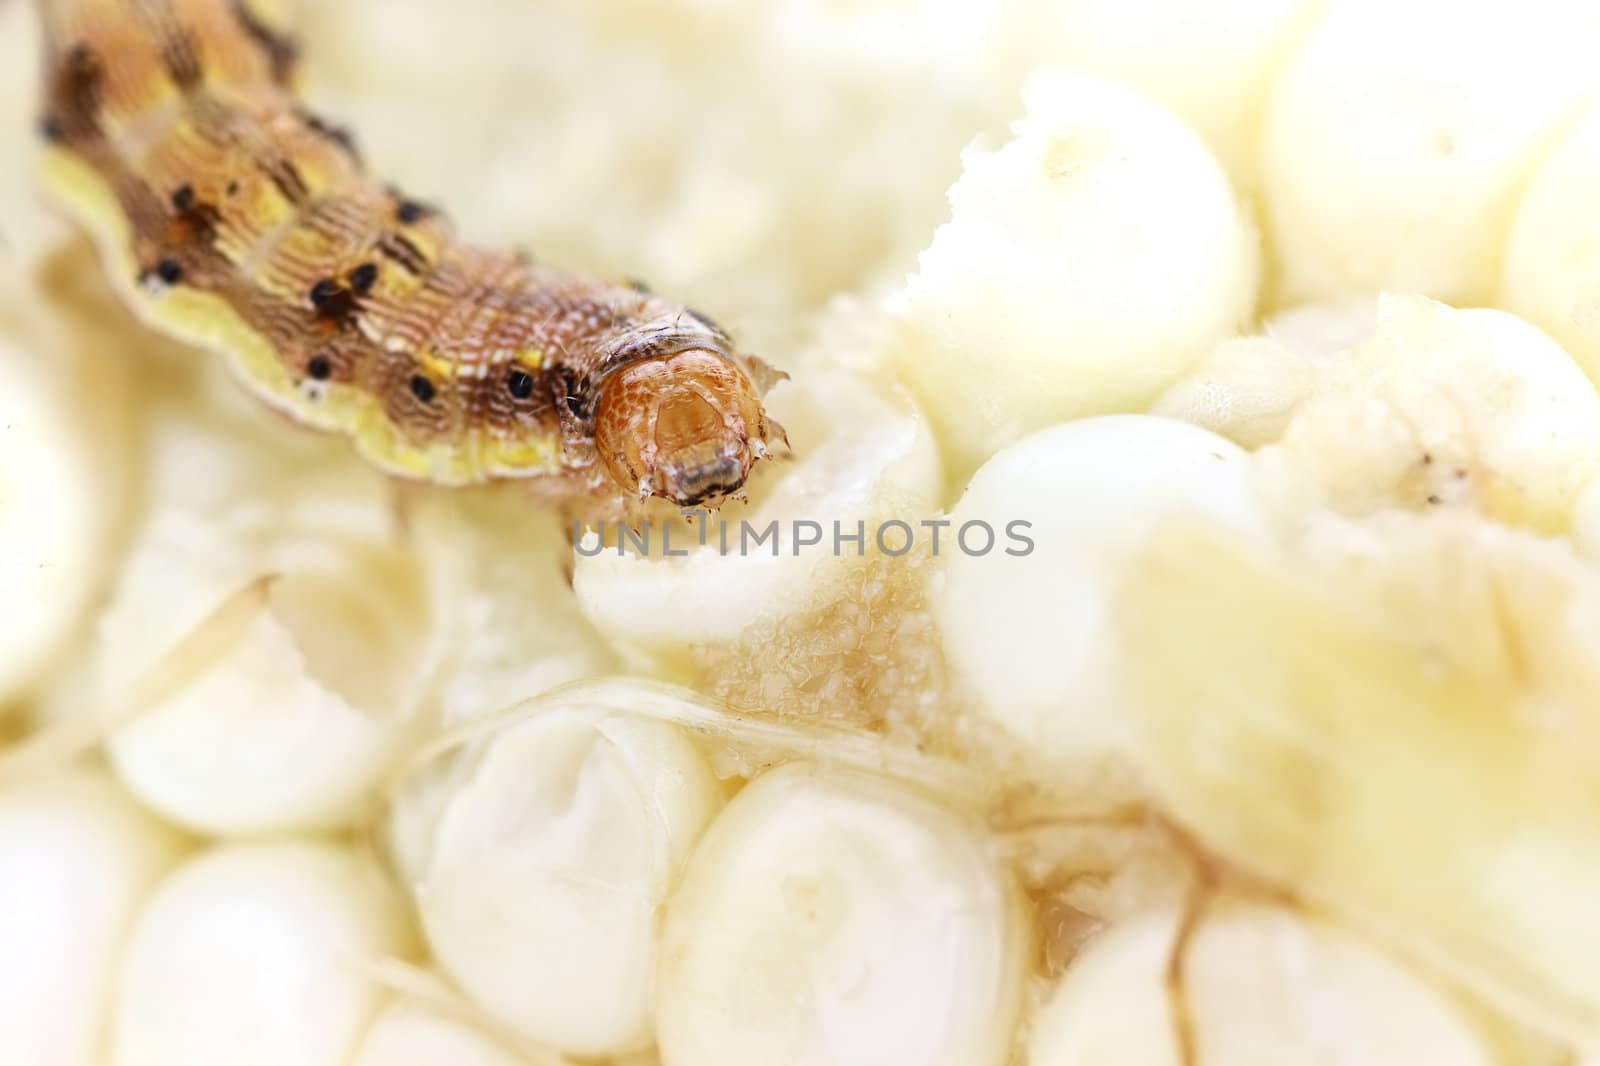 Abstract macro with extreme shallow dof of a corn earworm eat fresh white corn on the cob.